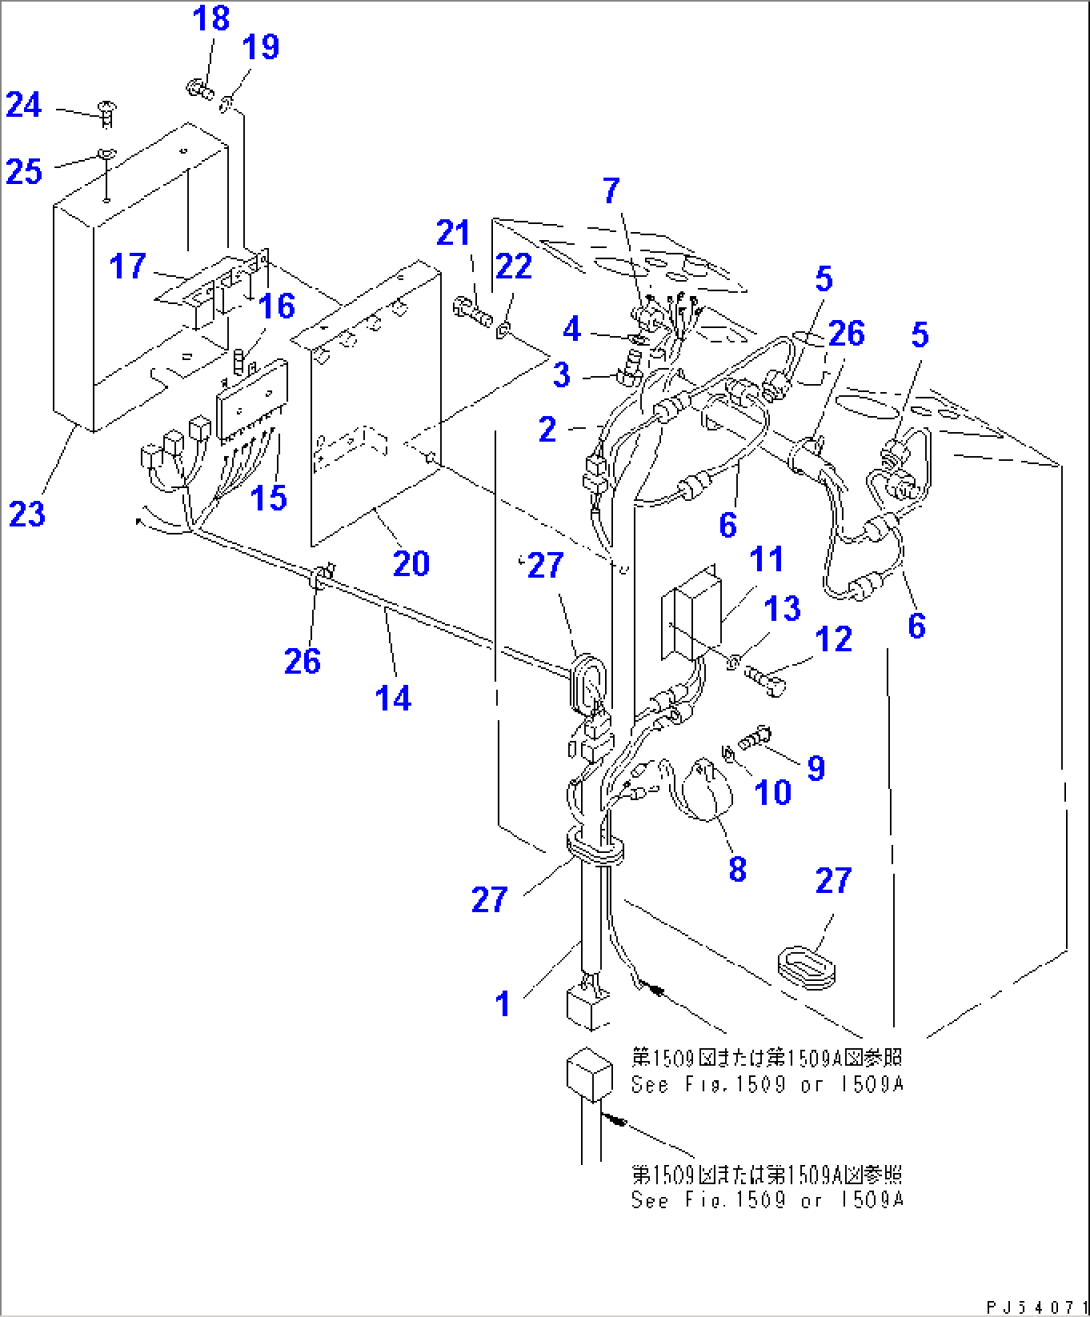 ELECTRICAL SYSTEM (CENTER)(#11002-11086)